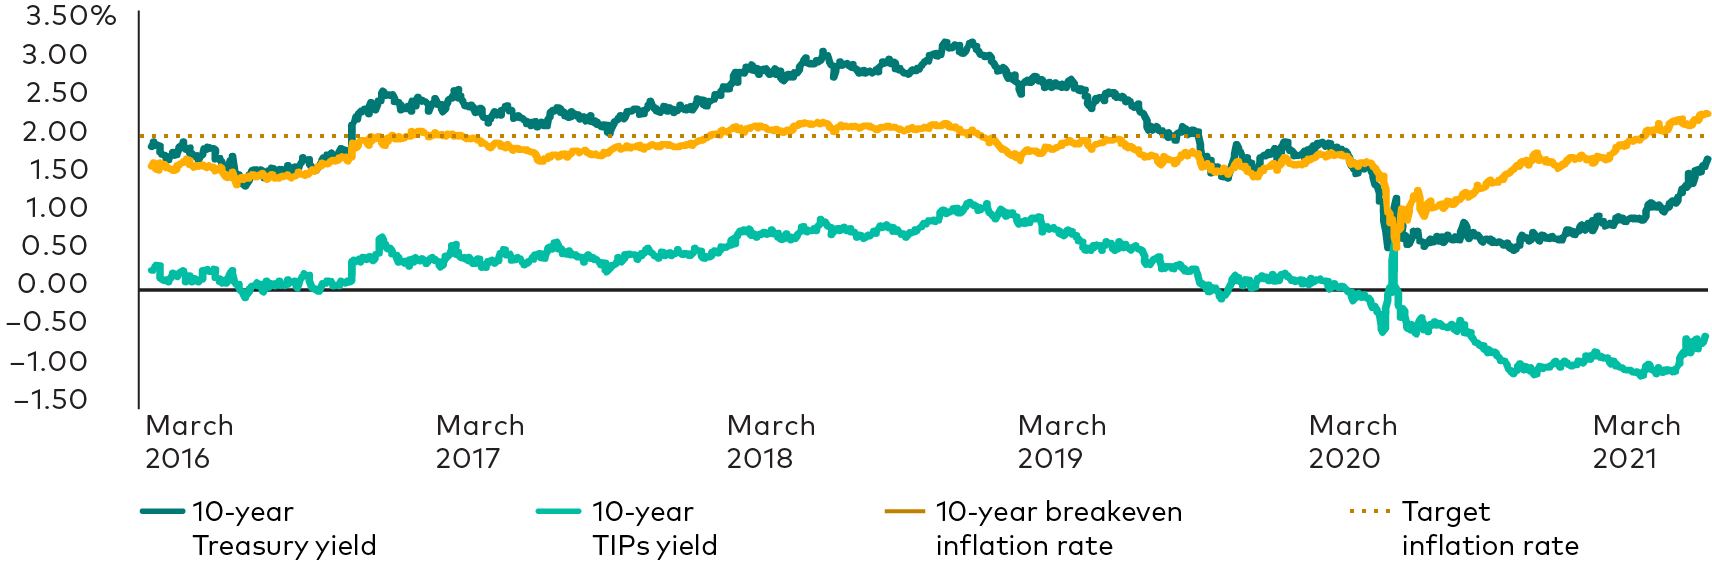 This line chart shows the 10-year U.S. Treasury yield, the 10-year TIPS yield, the 10-year breakeven inflation (BEI) rate, and the Federal Reserve’s target inflation rate of 2% a year. The 10-year breakeven inflation rate rose above the Fed’s target in early 2021. The 10-year Treasury yield turned higher in September 2020. The 10-year TIPS yield turned higher earlier this year.